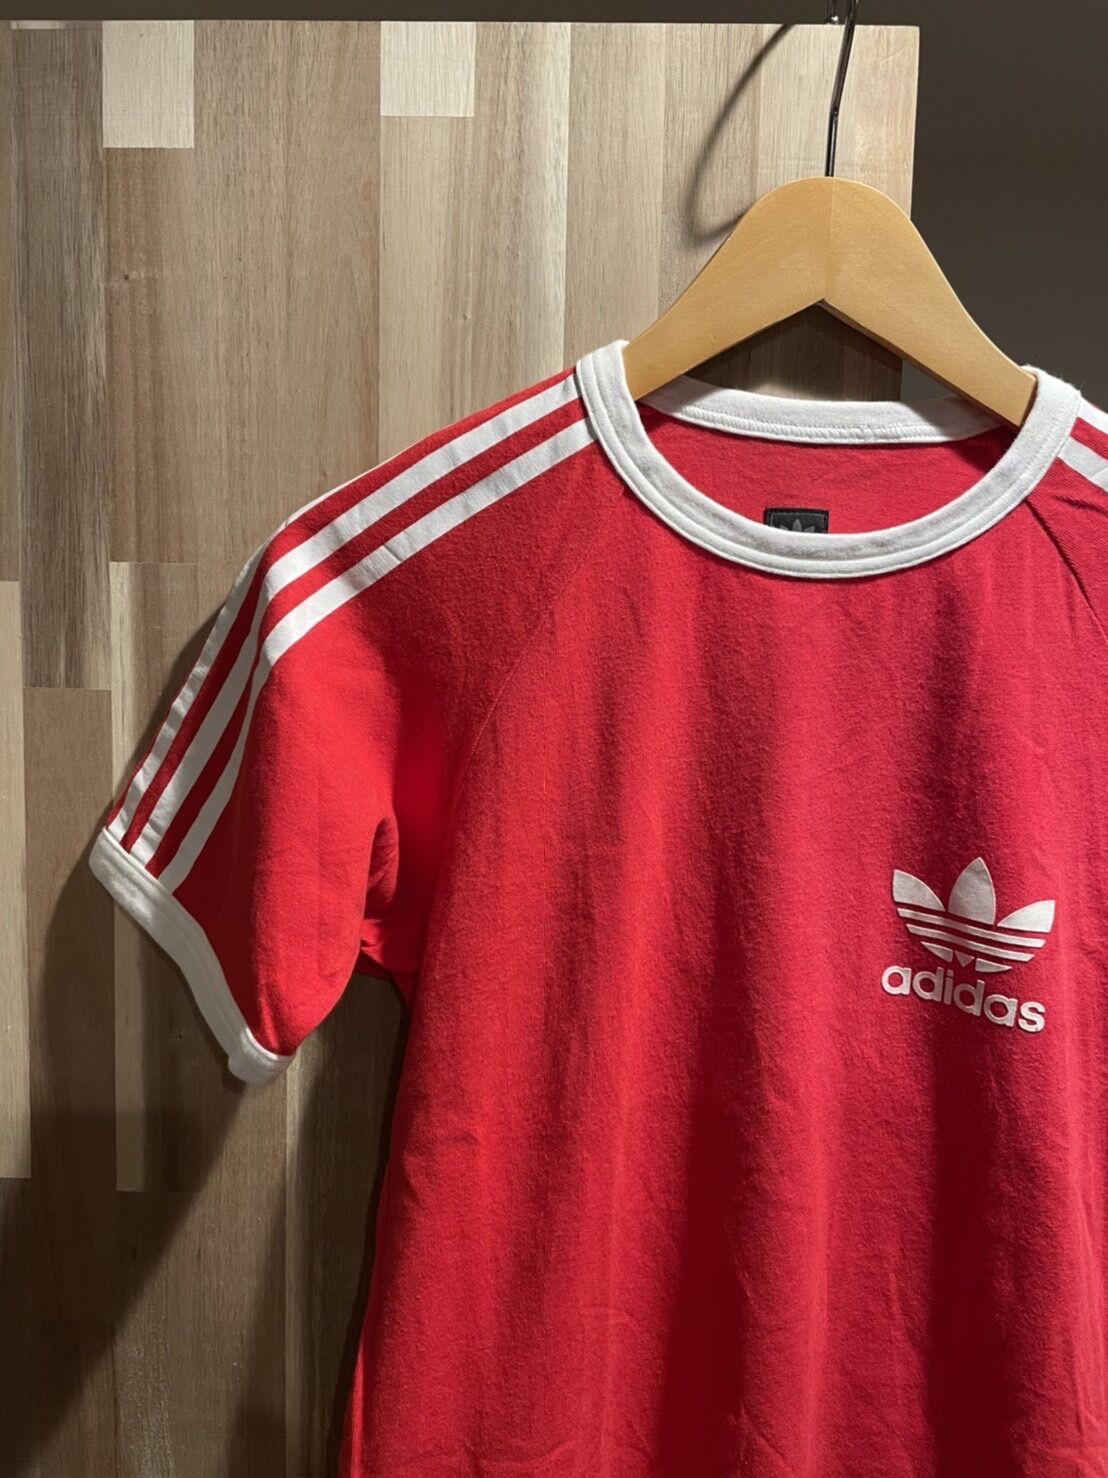 adidas 80's 復刻トレフォイル リンガー Tシャツ レッド | 古着屋Quest